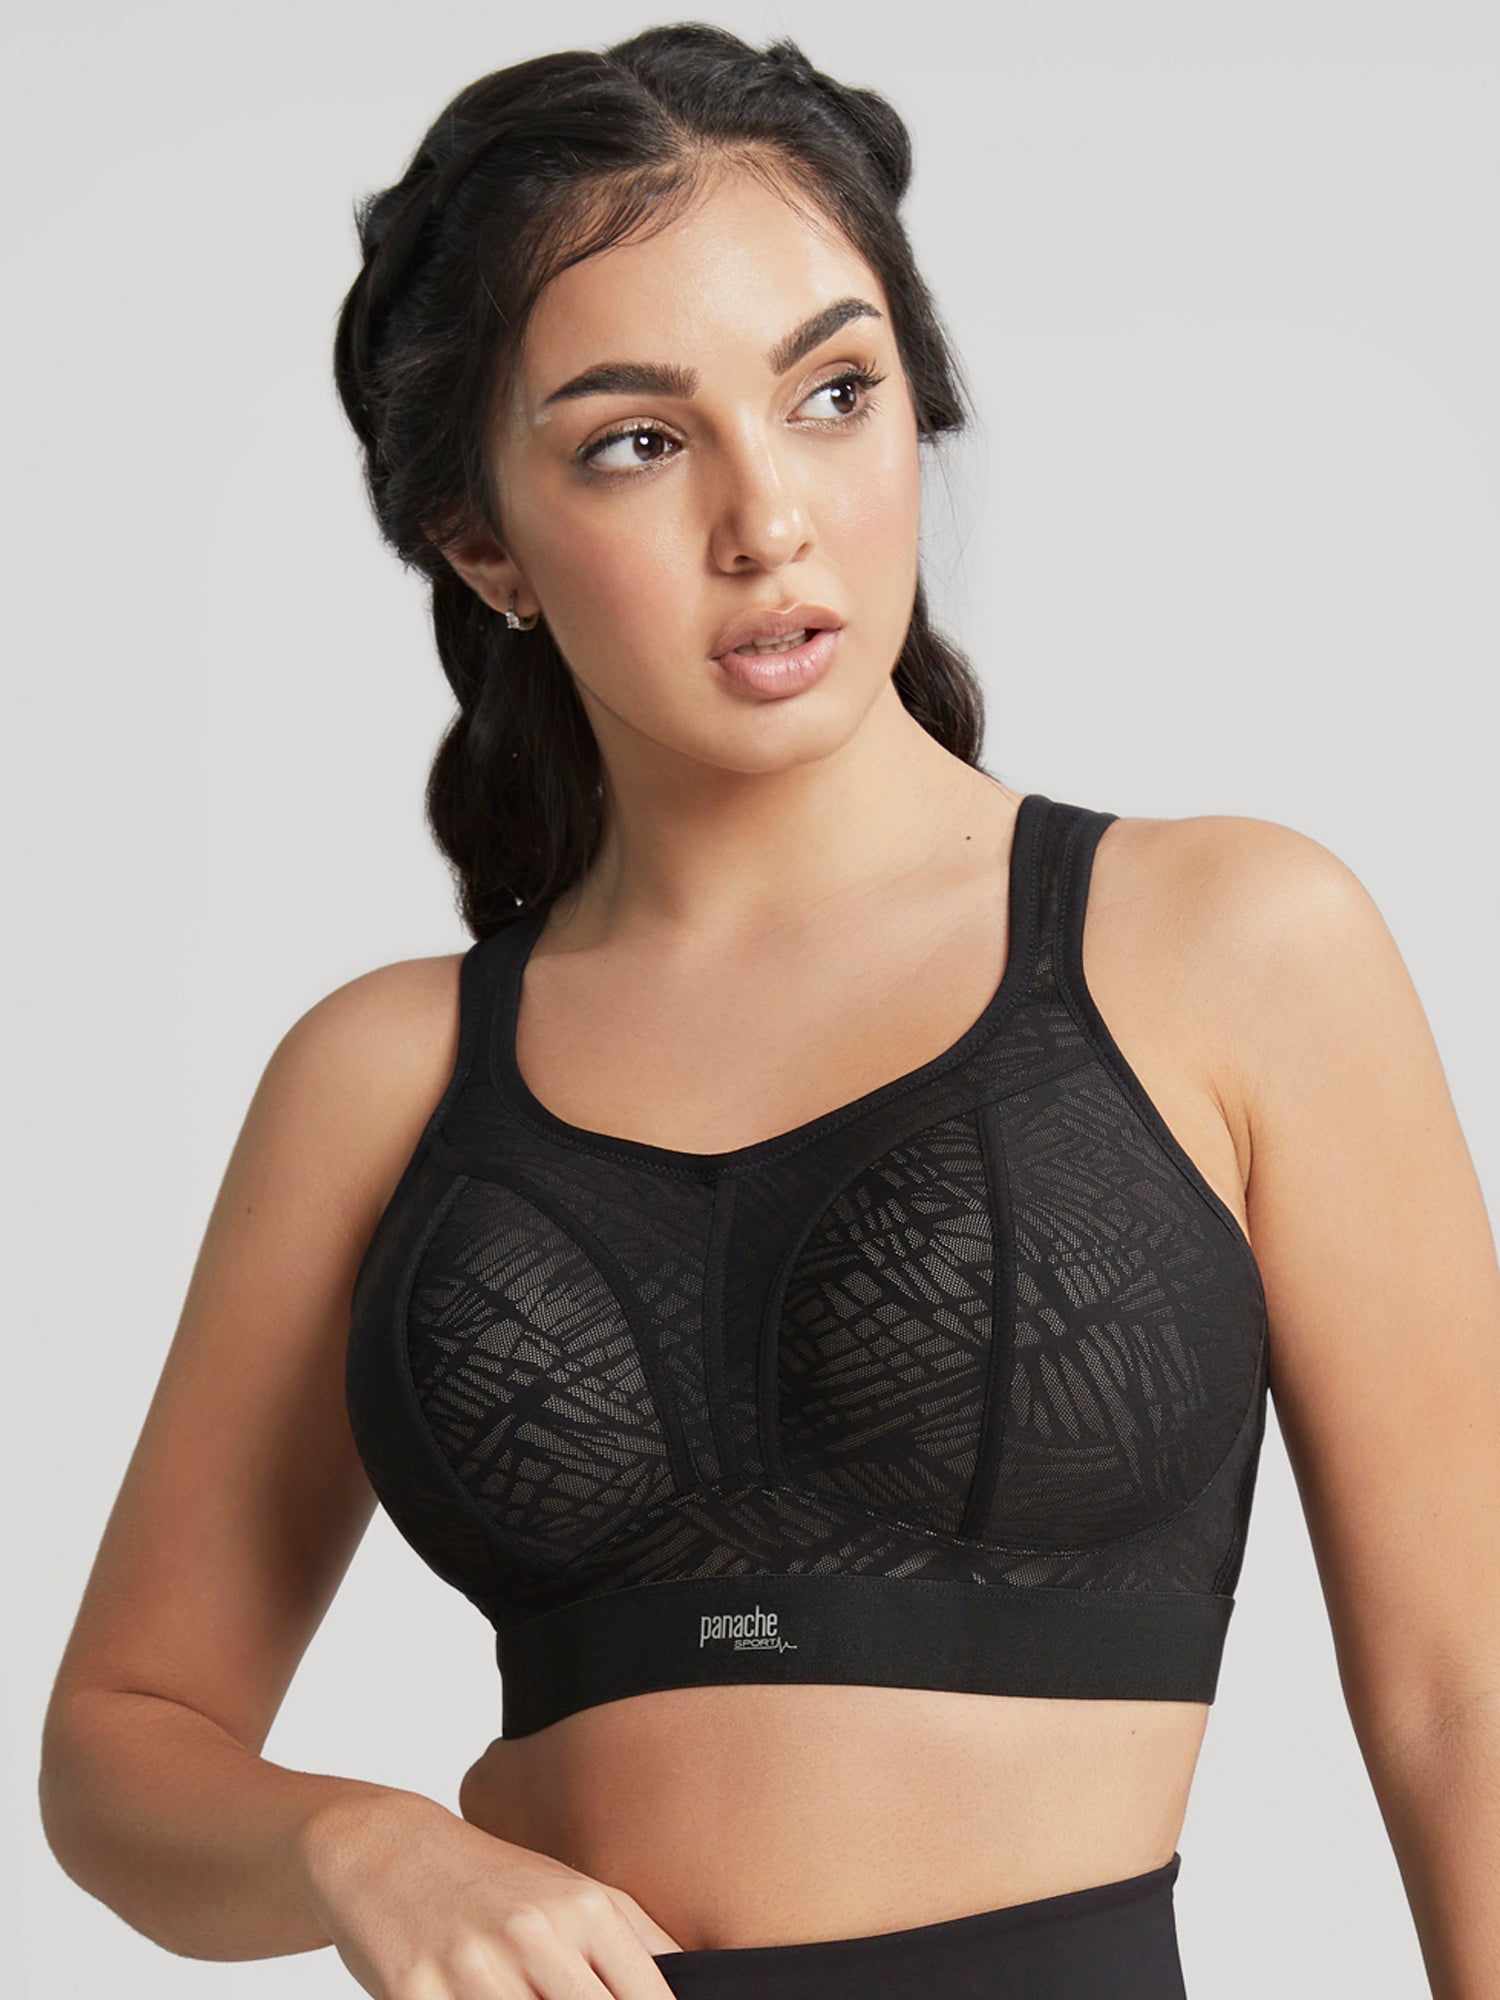 Must Have Gifts Plus+Size+Bras+for+Women+Non+Wired Sports Bras